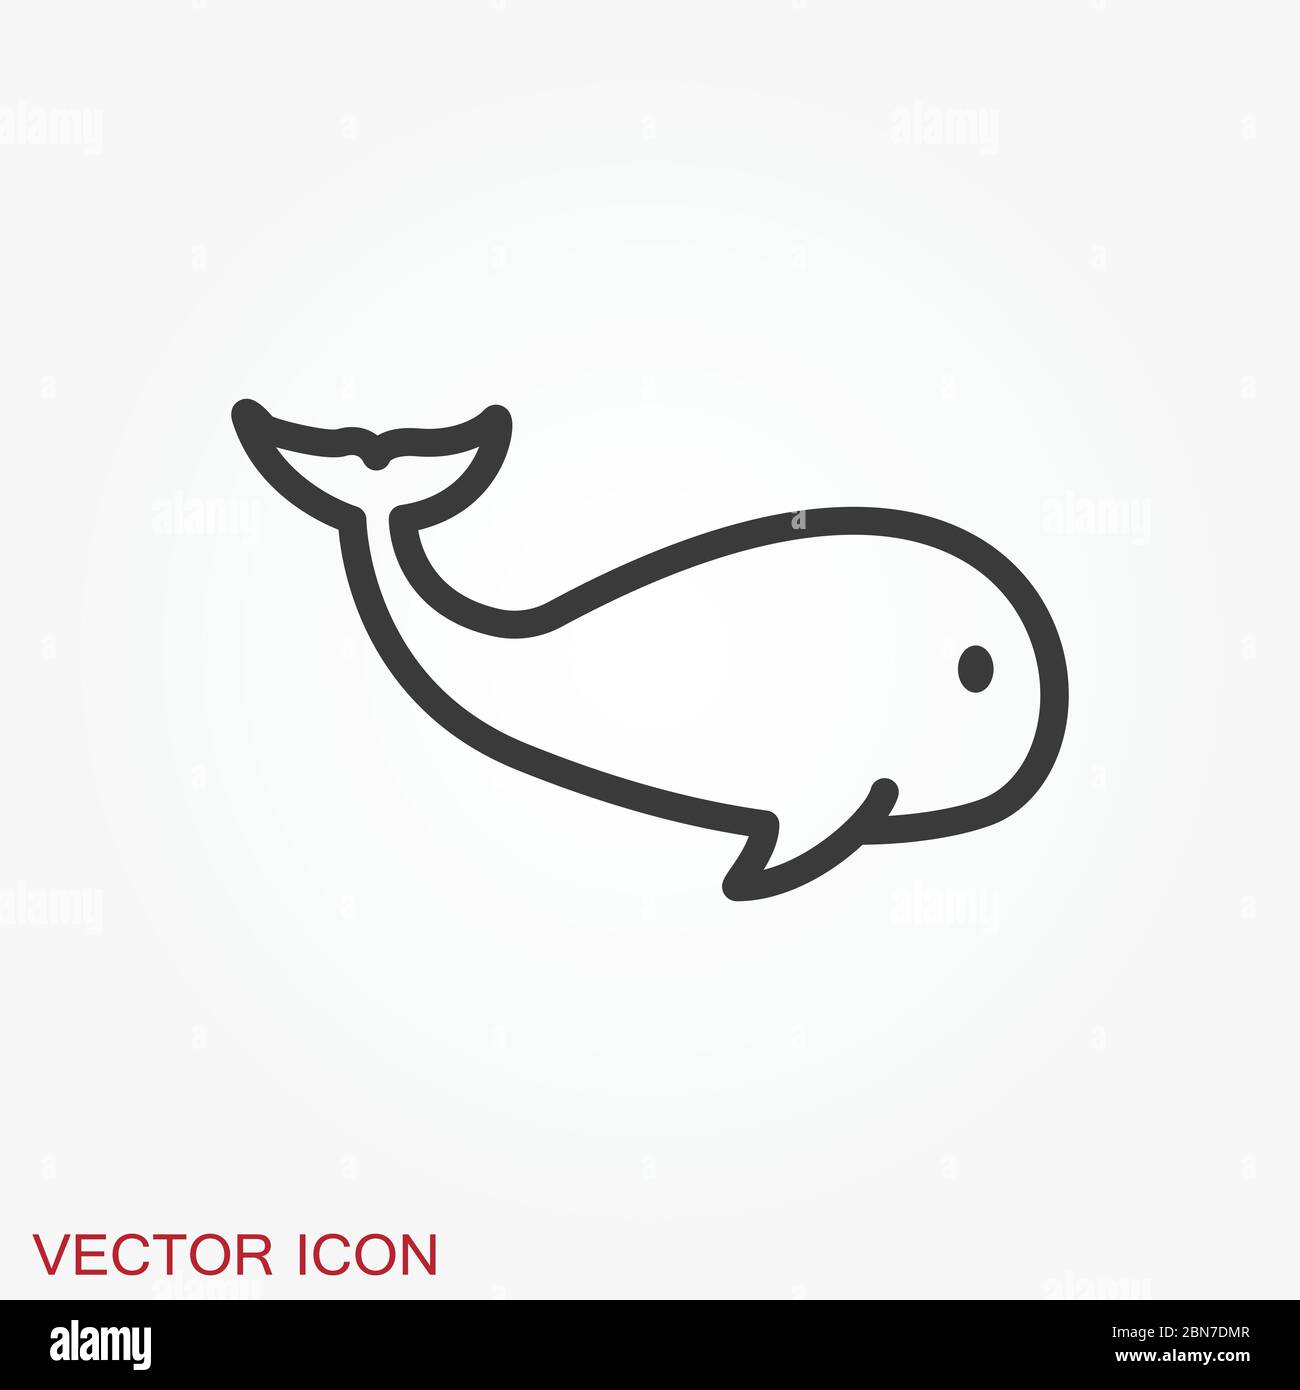 Whale vector icon. Underwater. Animal symbol isolated on background. Stock Vector